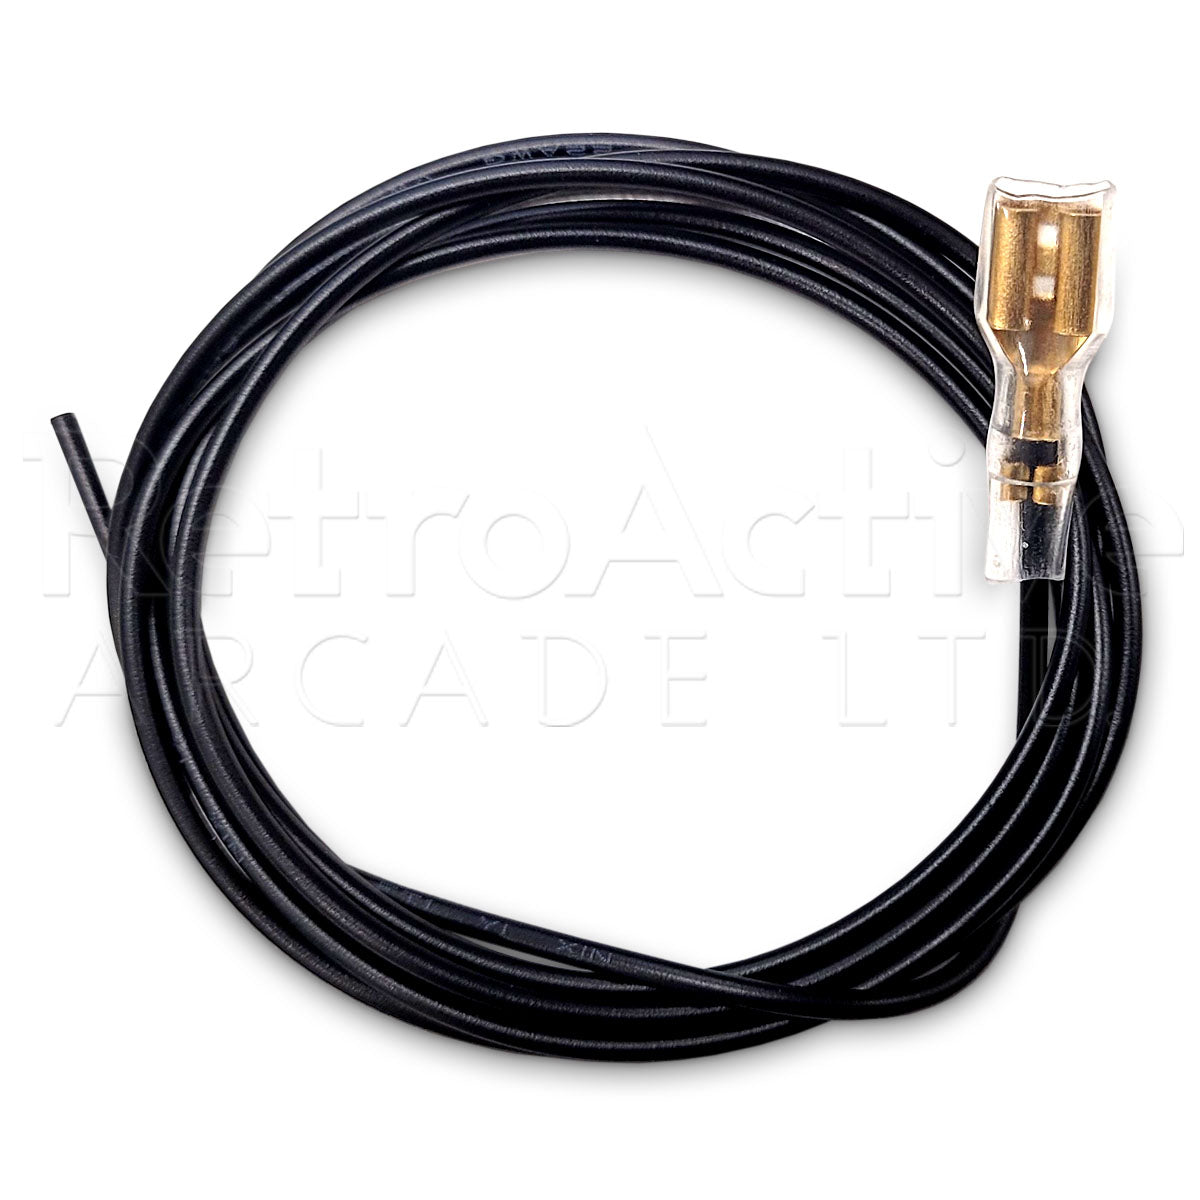 1 Meter Wire with .110" Connector - Black Wiring & Harnesses Universal - Retro Active Arcade